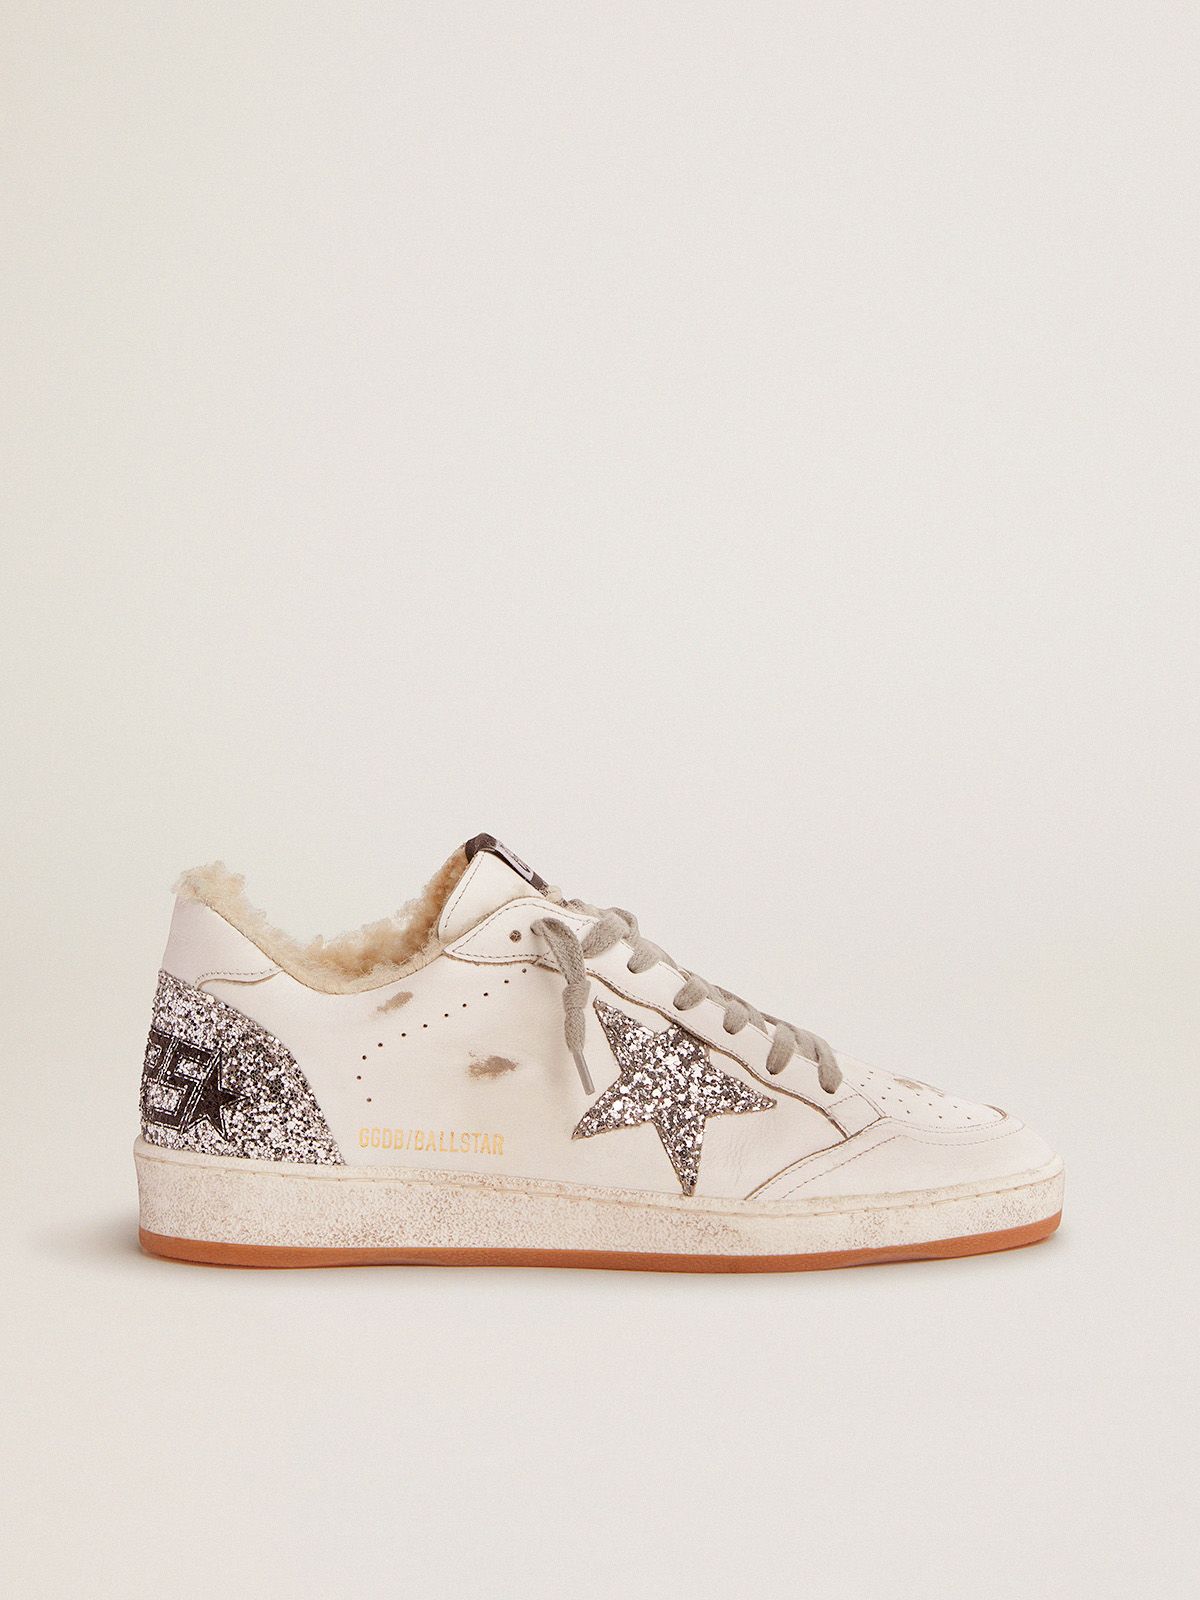 Ball Star sneakers in white leather with silver glitter details and shearling lining